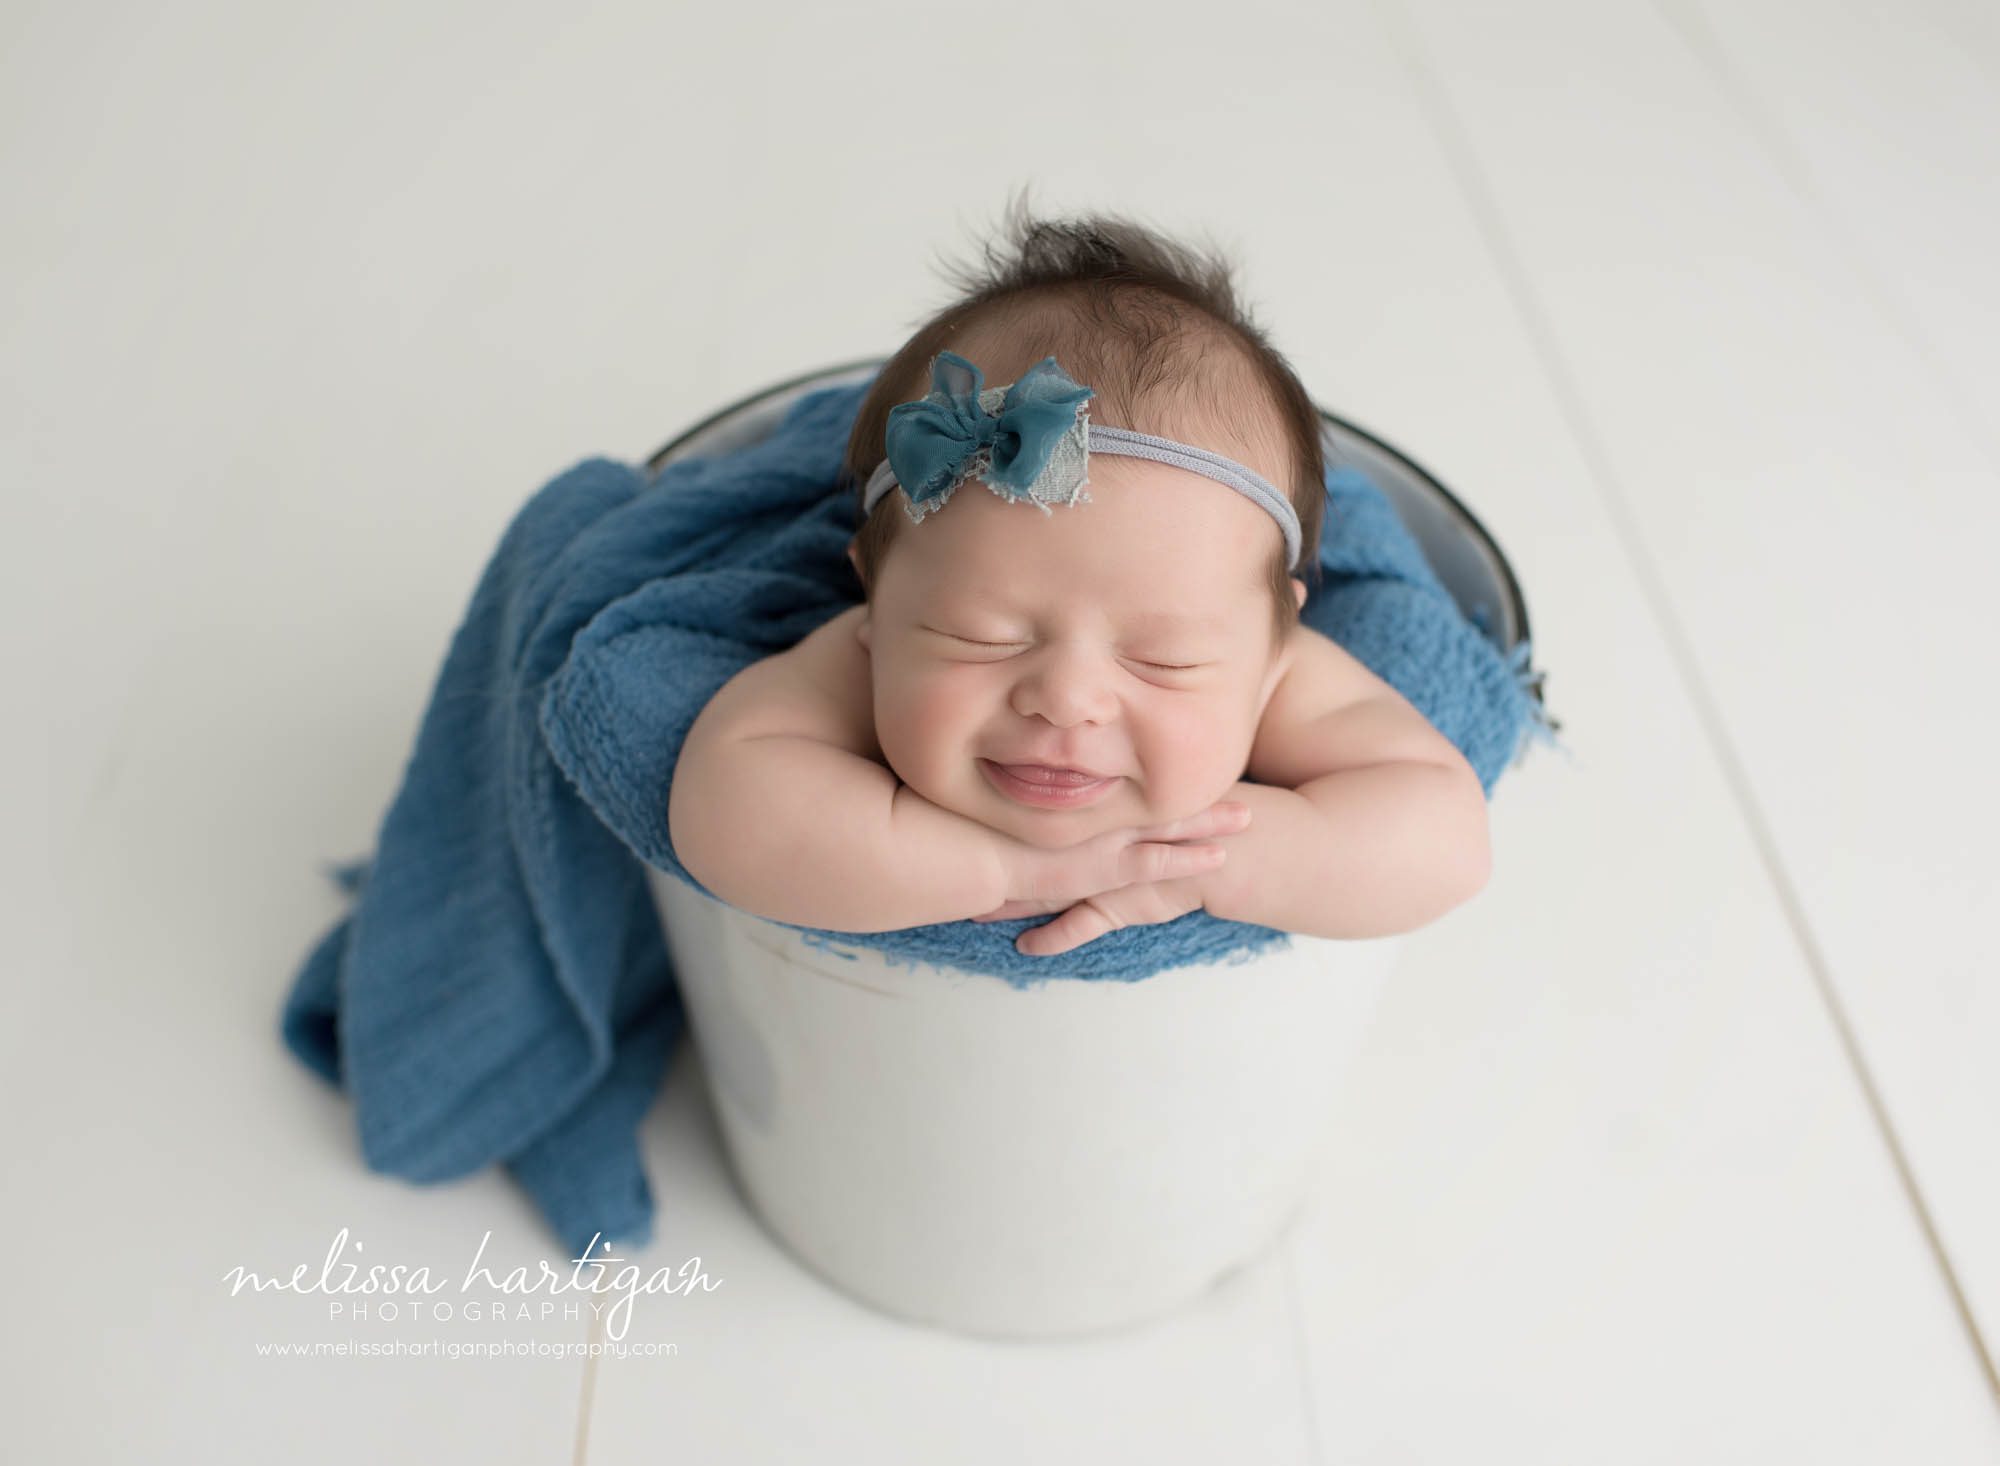 Melissa Hartigan Photography Connecticut Newborn Photographer Coventry Ct Middlefield CT baby Fairfield county Newborn and maternity photography Baby girl blue headband in white metal bucket with blue wrap head on arms smiling sleeping